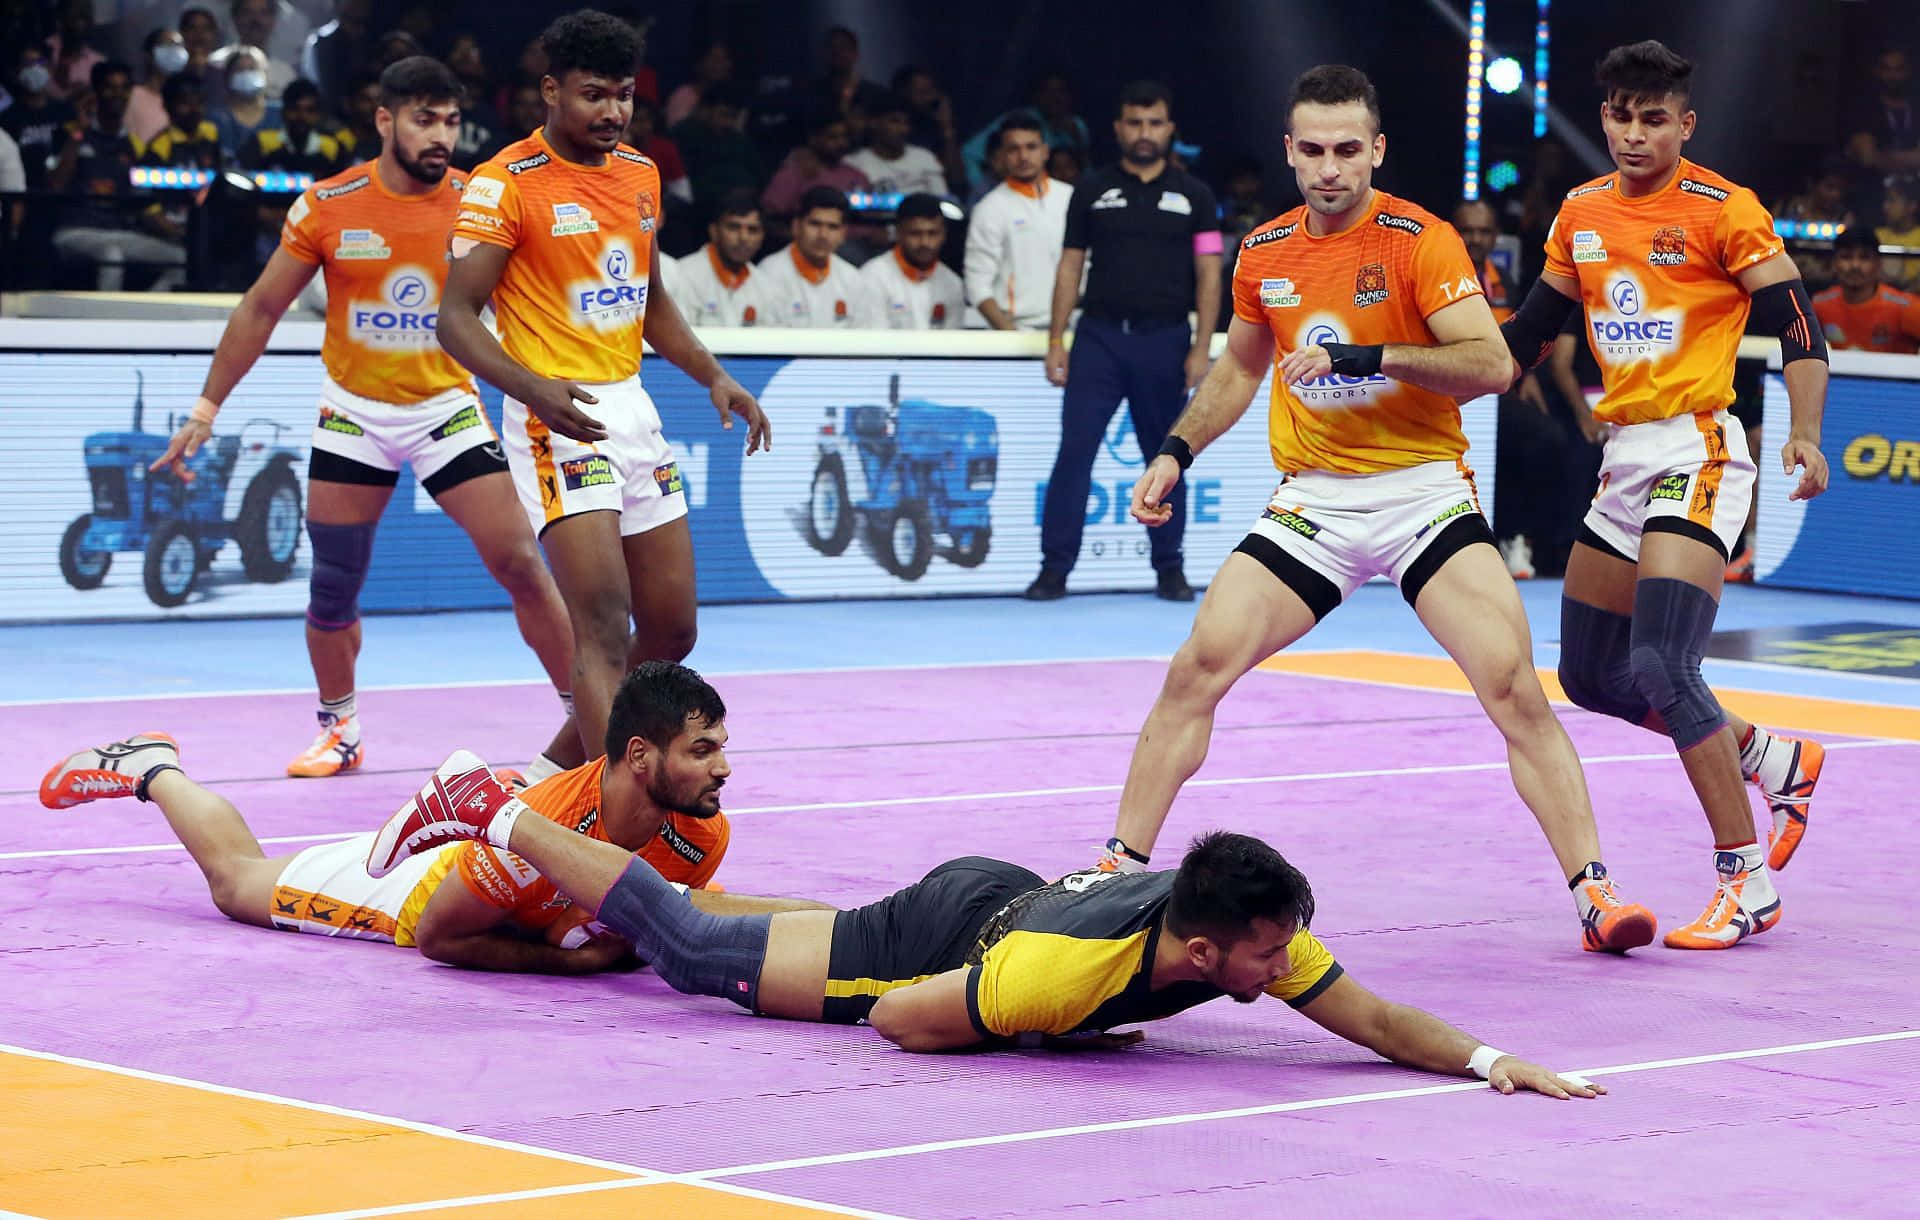 Intense Action in a Professional Kabaddi Match